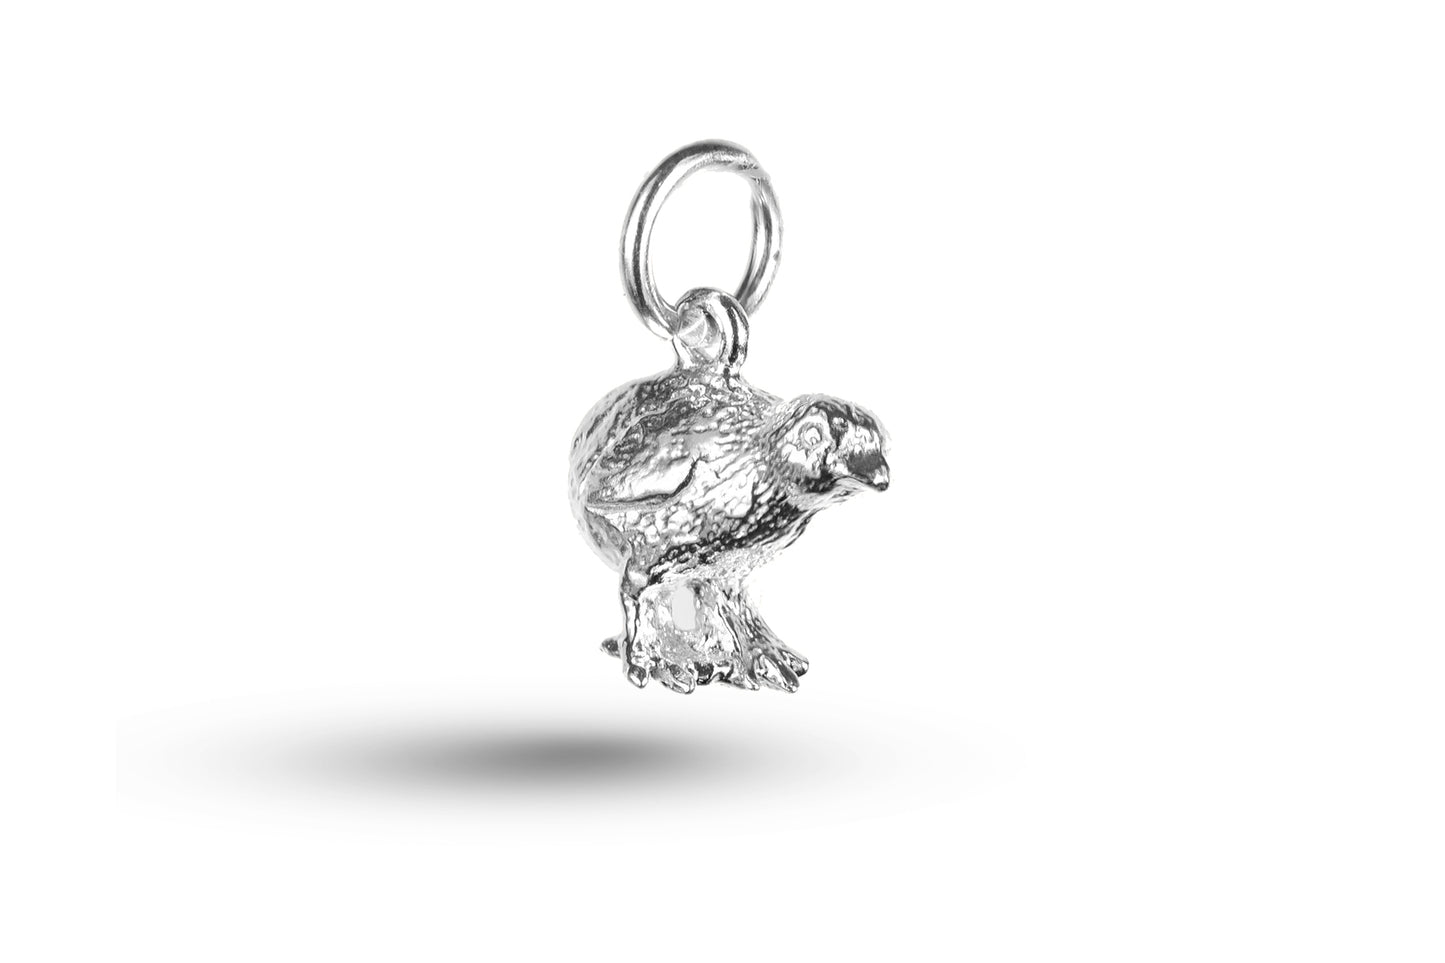 Luxury white gold Chick charm.